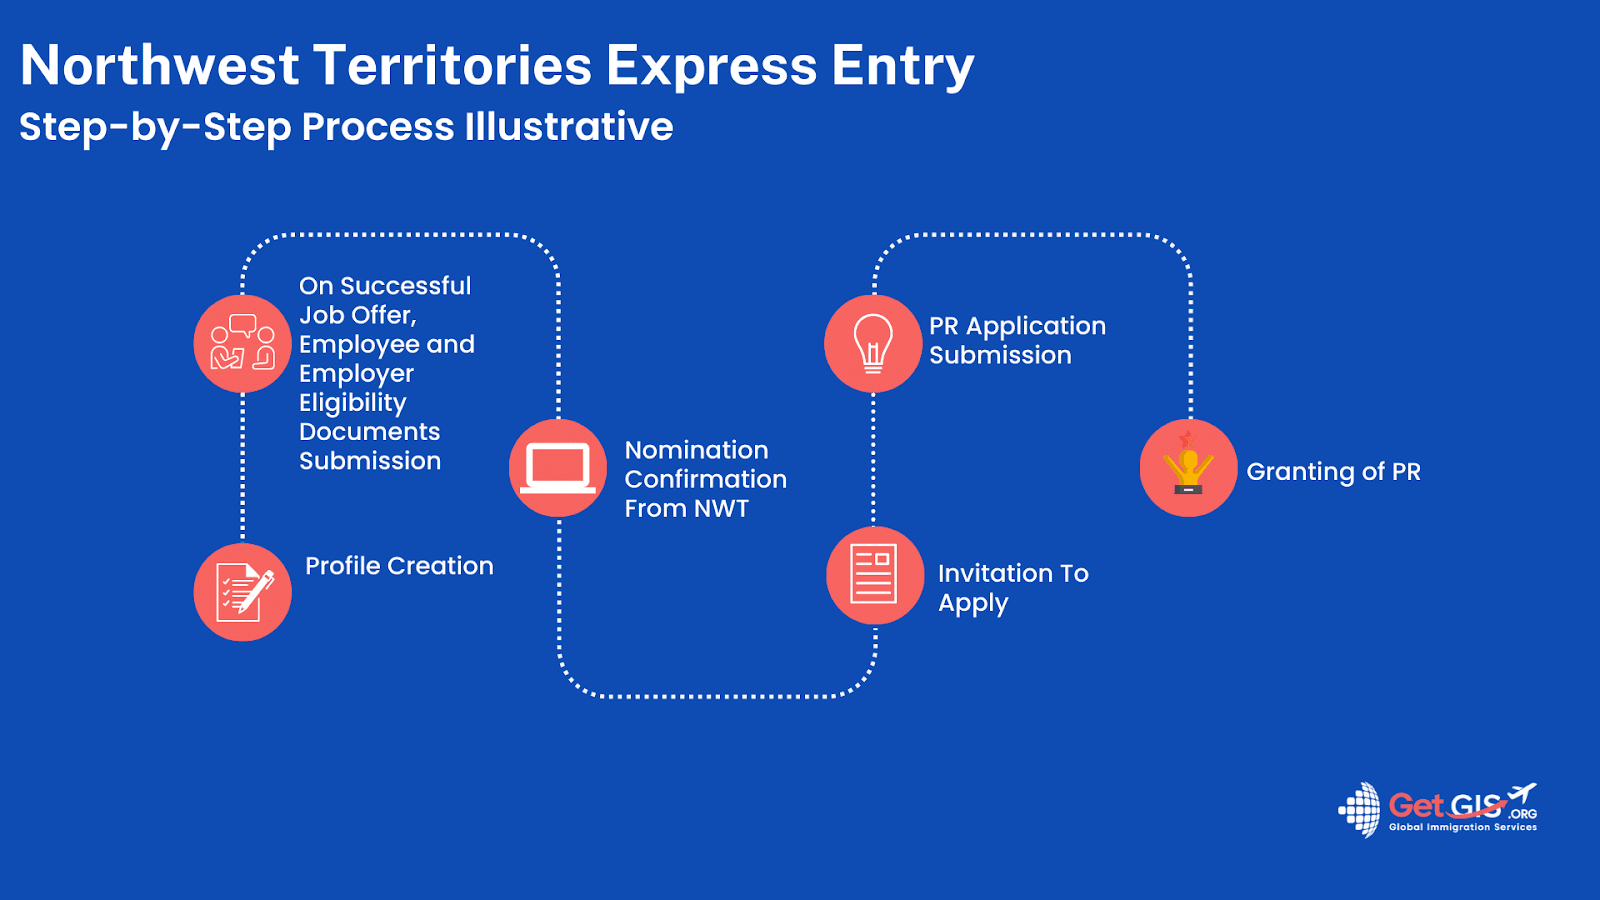 Immigration Process for Northwest Territories Express Entry Stream